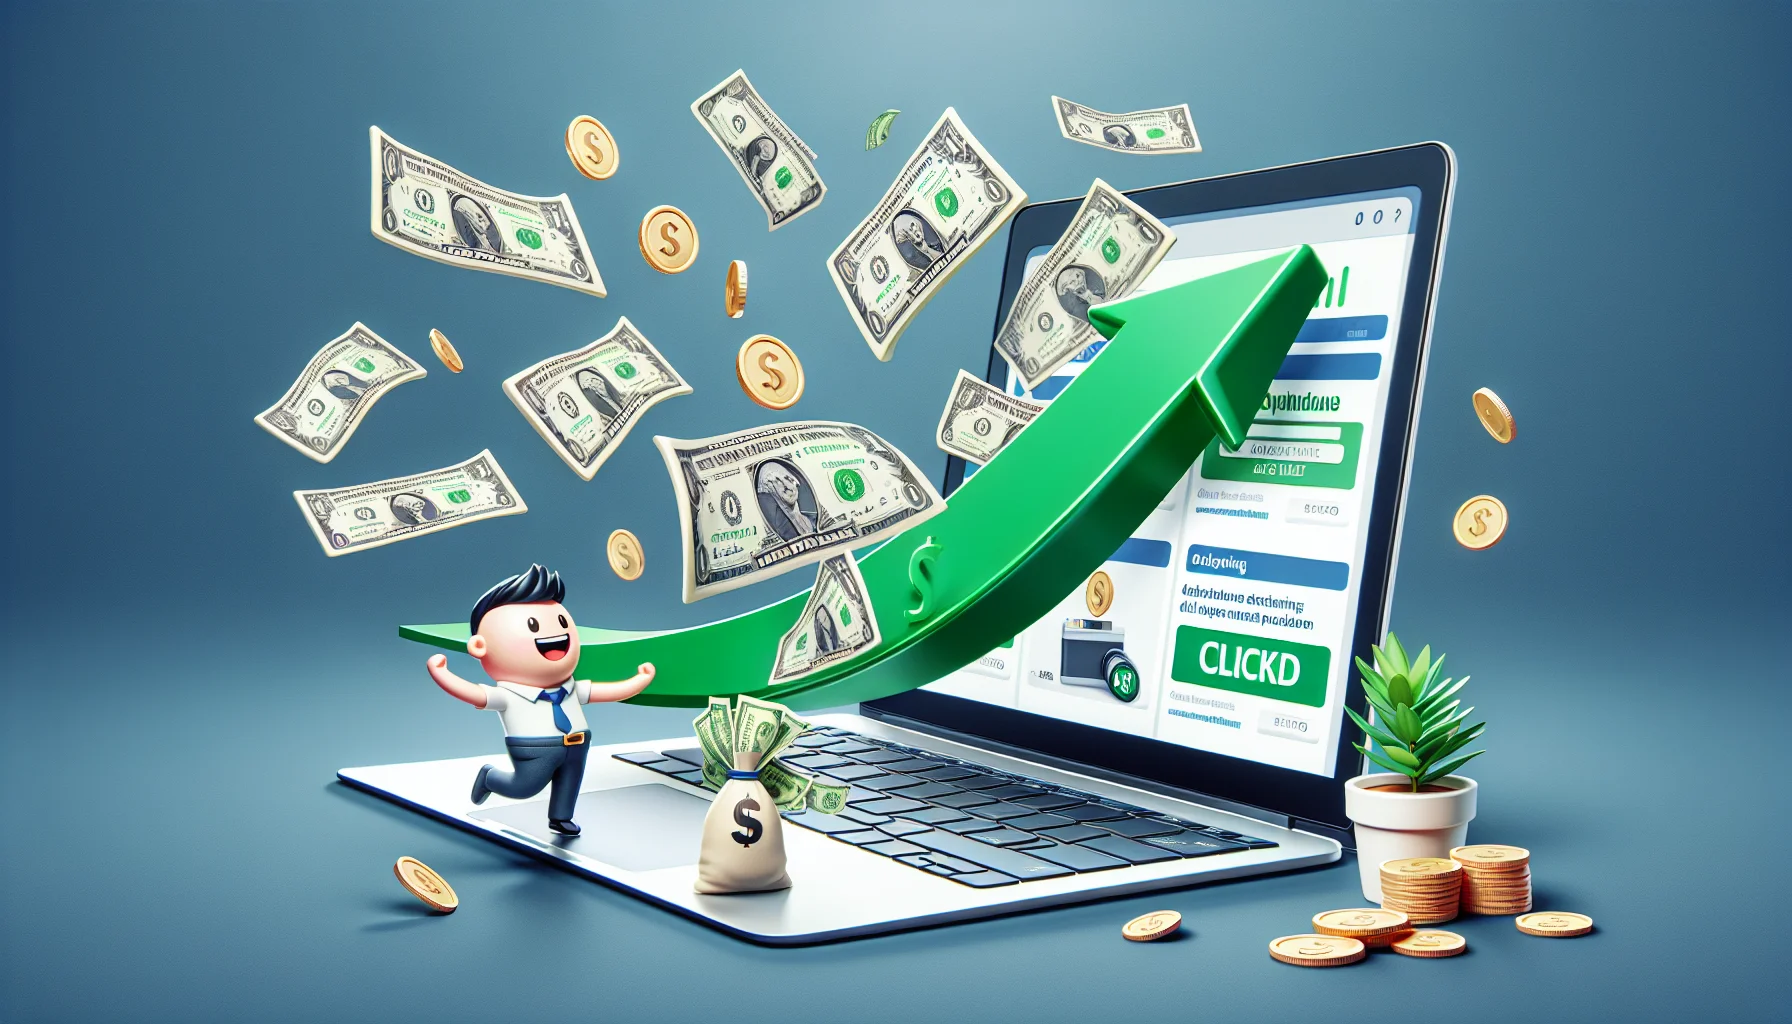 Create an amusing and realistic image that illustrates the concept of affiliate marketing. Imagine a scene where an animated laptop screen shows click-worthy ads of products, while cash bills are digitally flowing out from the screen, symbolizing the income generated through online promotions. Include symbolic elements like a green upward arrow to represent growth and a small figurine joyfully piling up coins, clearly showing the appealing aspect of making money online.